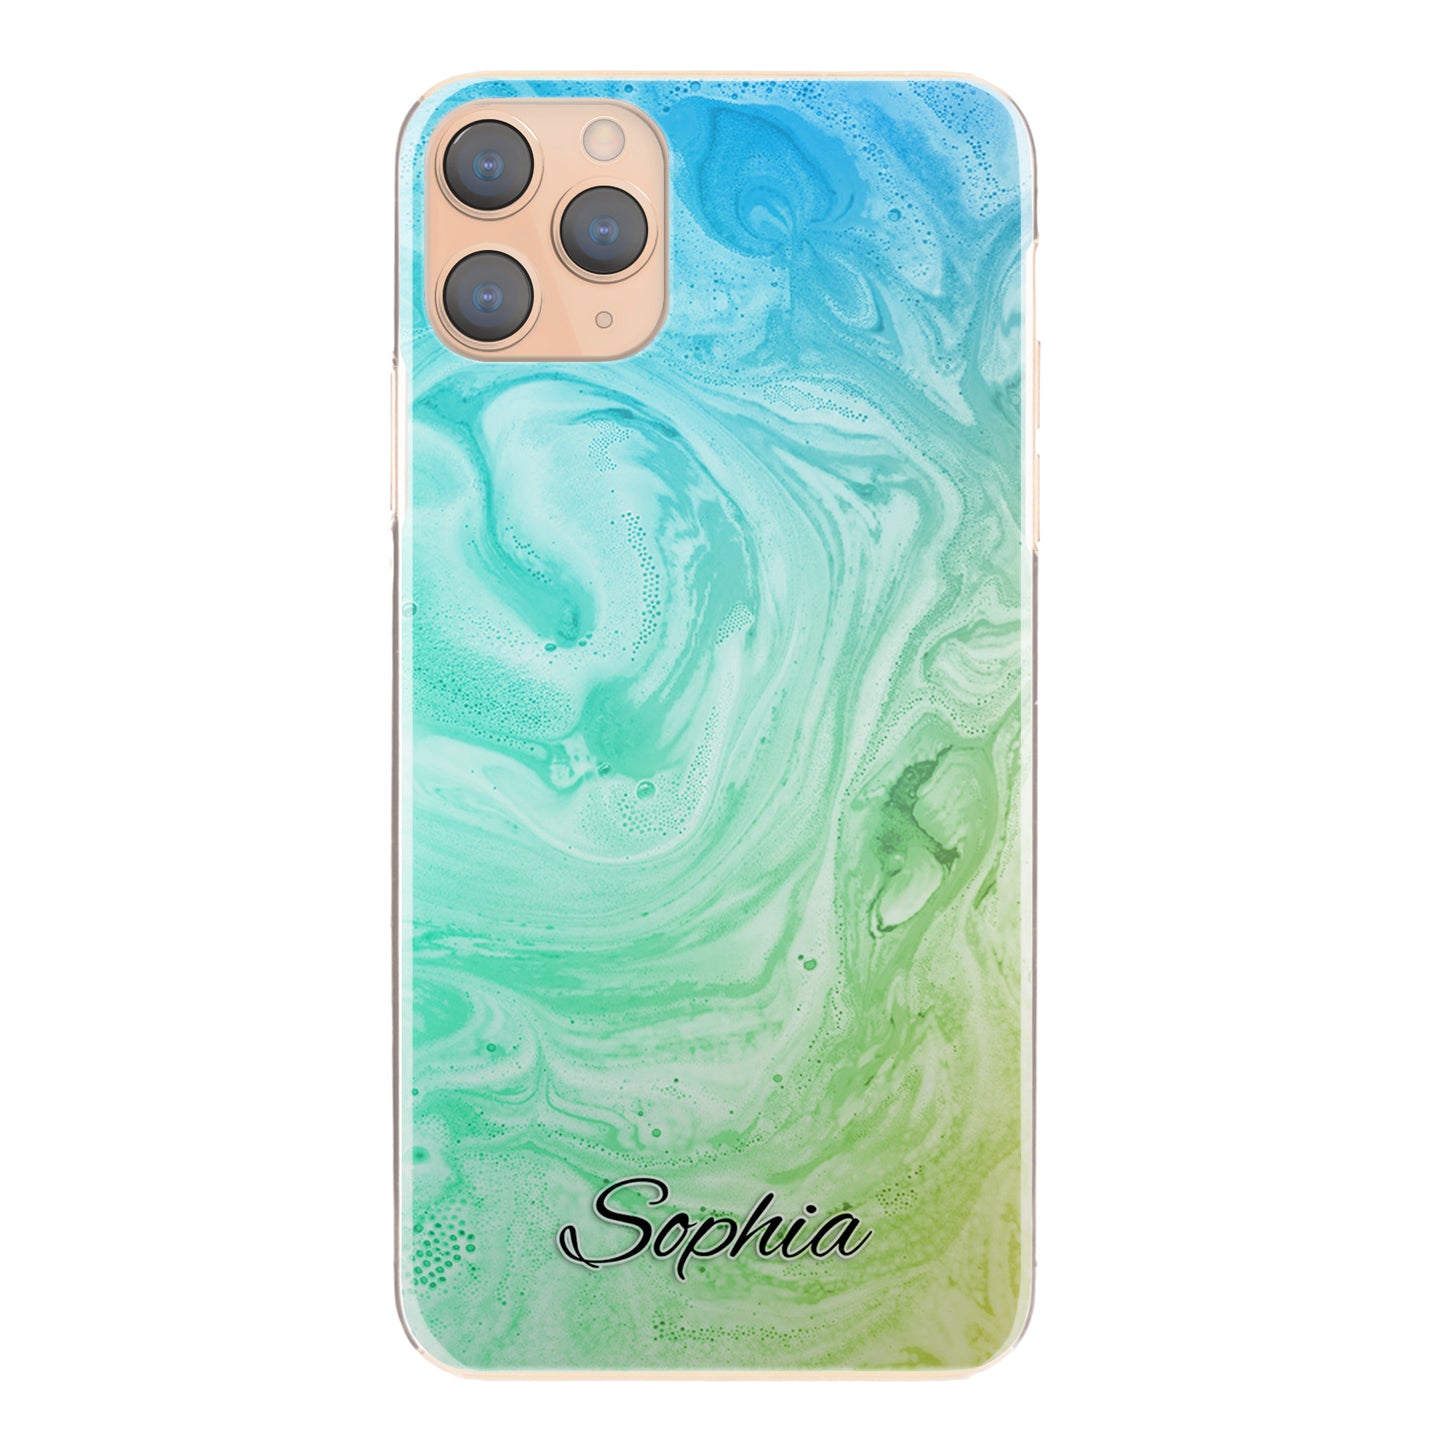 Personalised Oppo Phone Hard Case with Stylish Text on Turquoise Gradient Swirled Marble